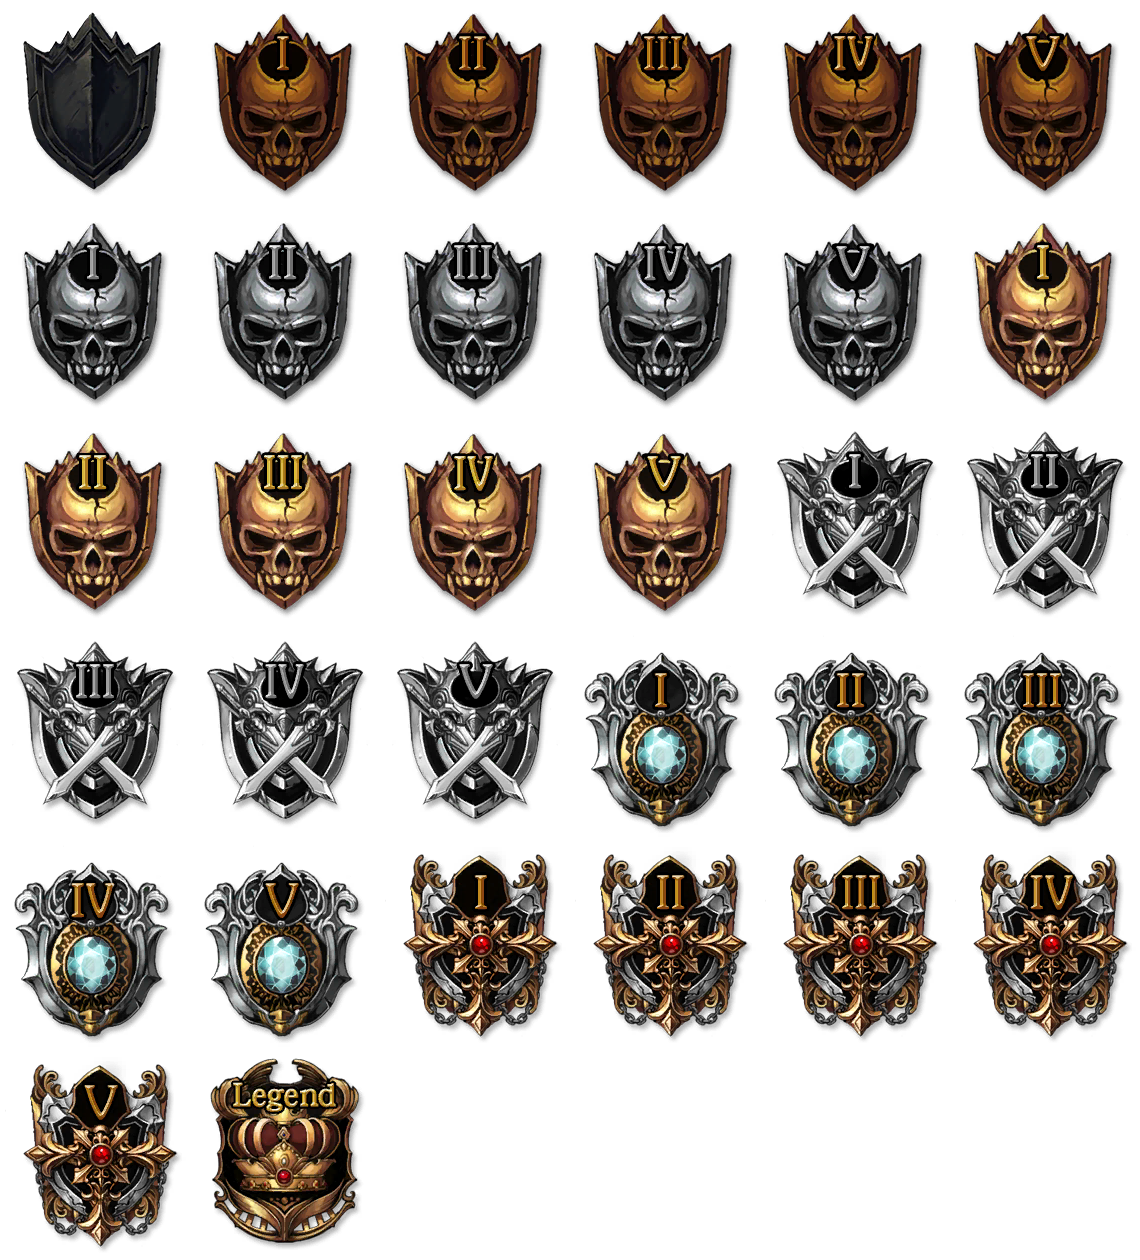 Castlevania: Grimoire of Souls - Multiplayer Tier Icons